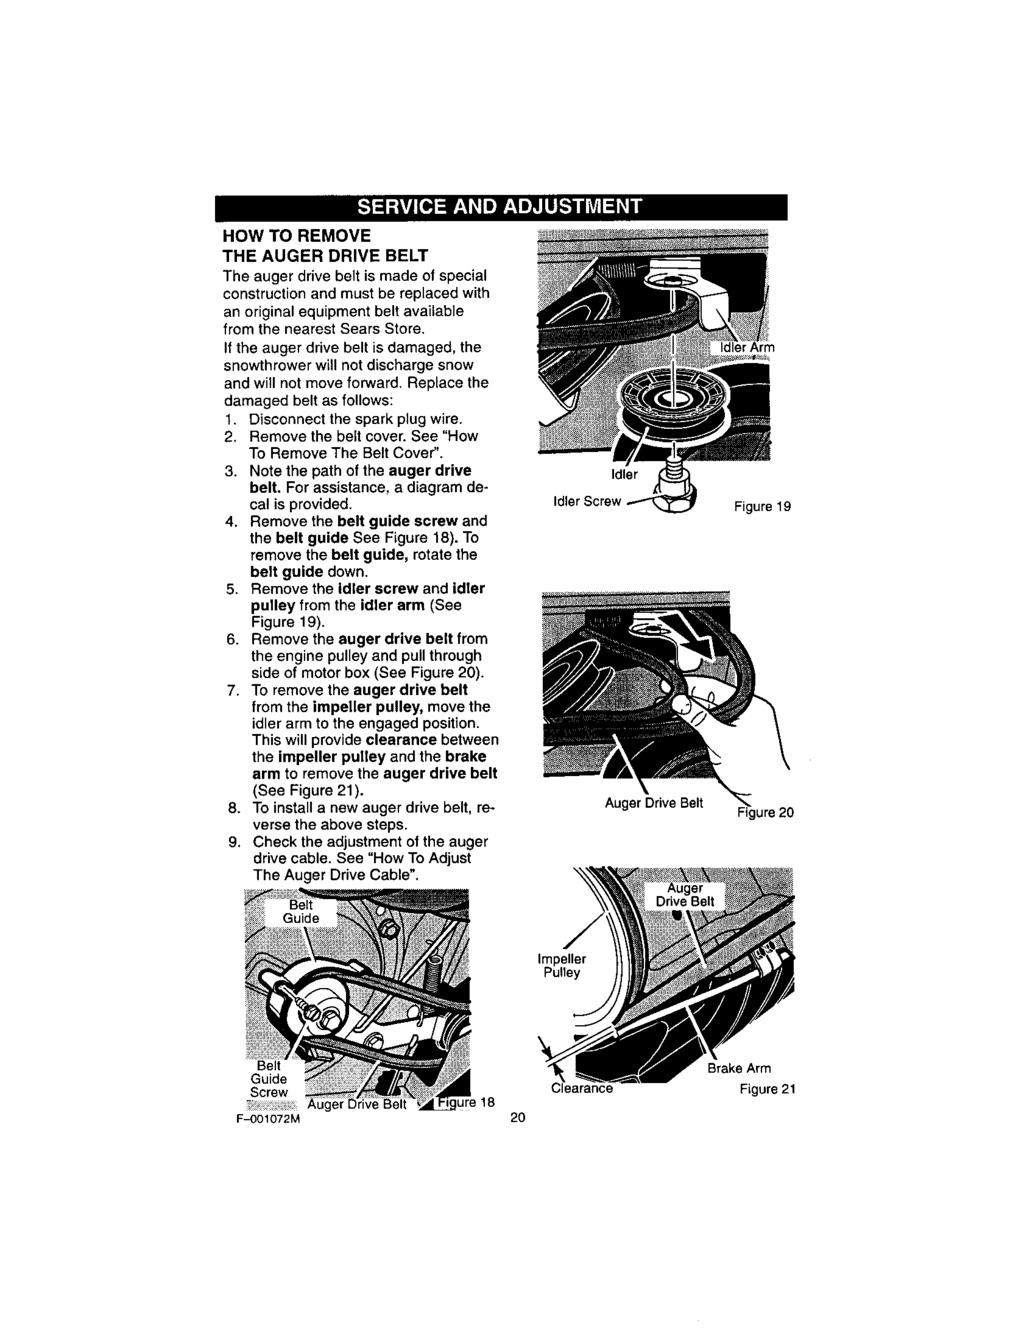 HOW TO REMOVE THE AUGER DRIVE BELT The auger drive belt is made of special construction and must be replaced with an original equipment belt available from the nearest Sears Store.